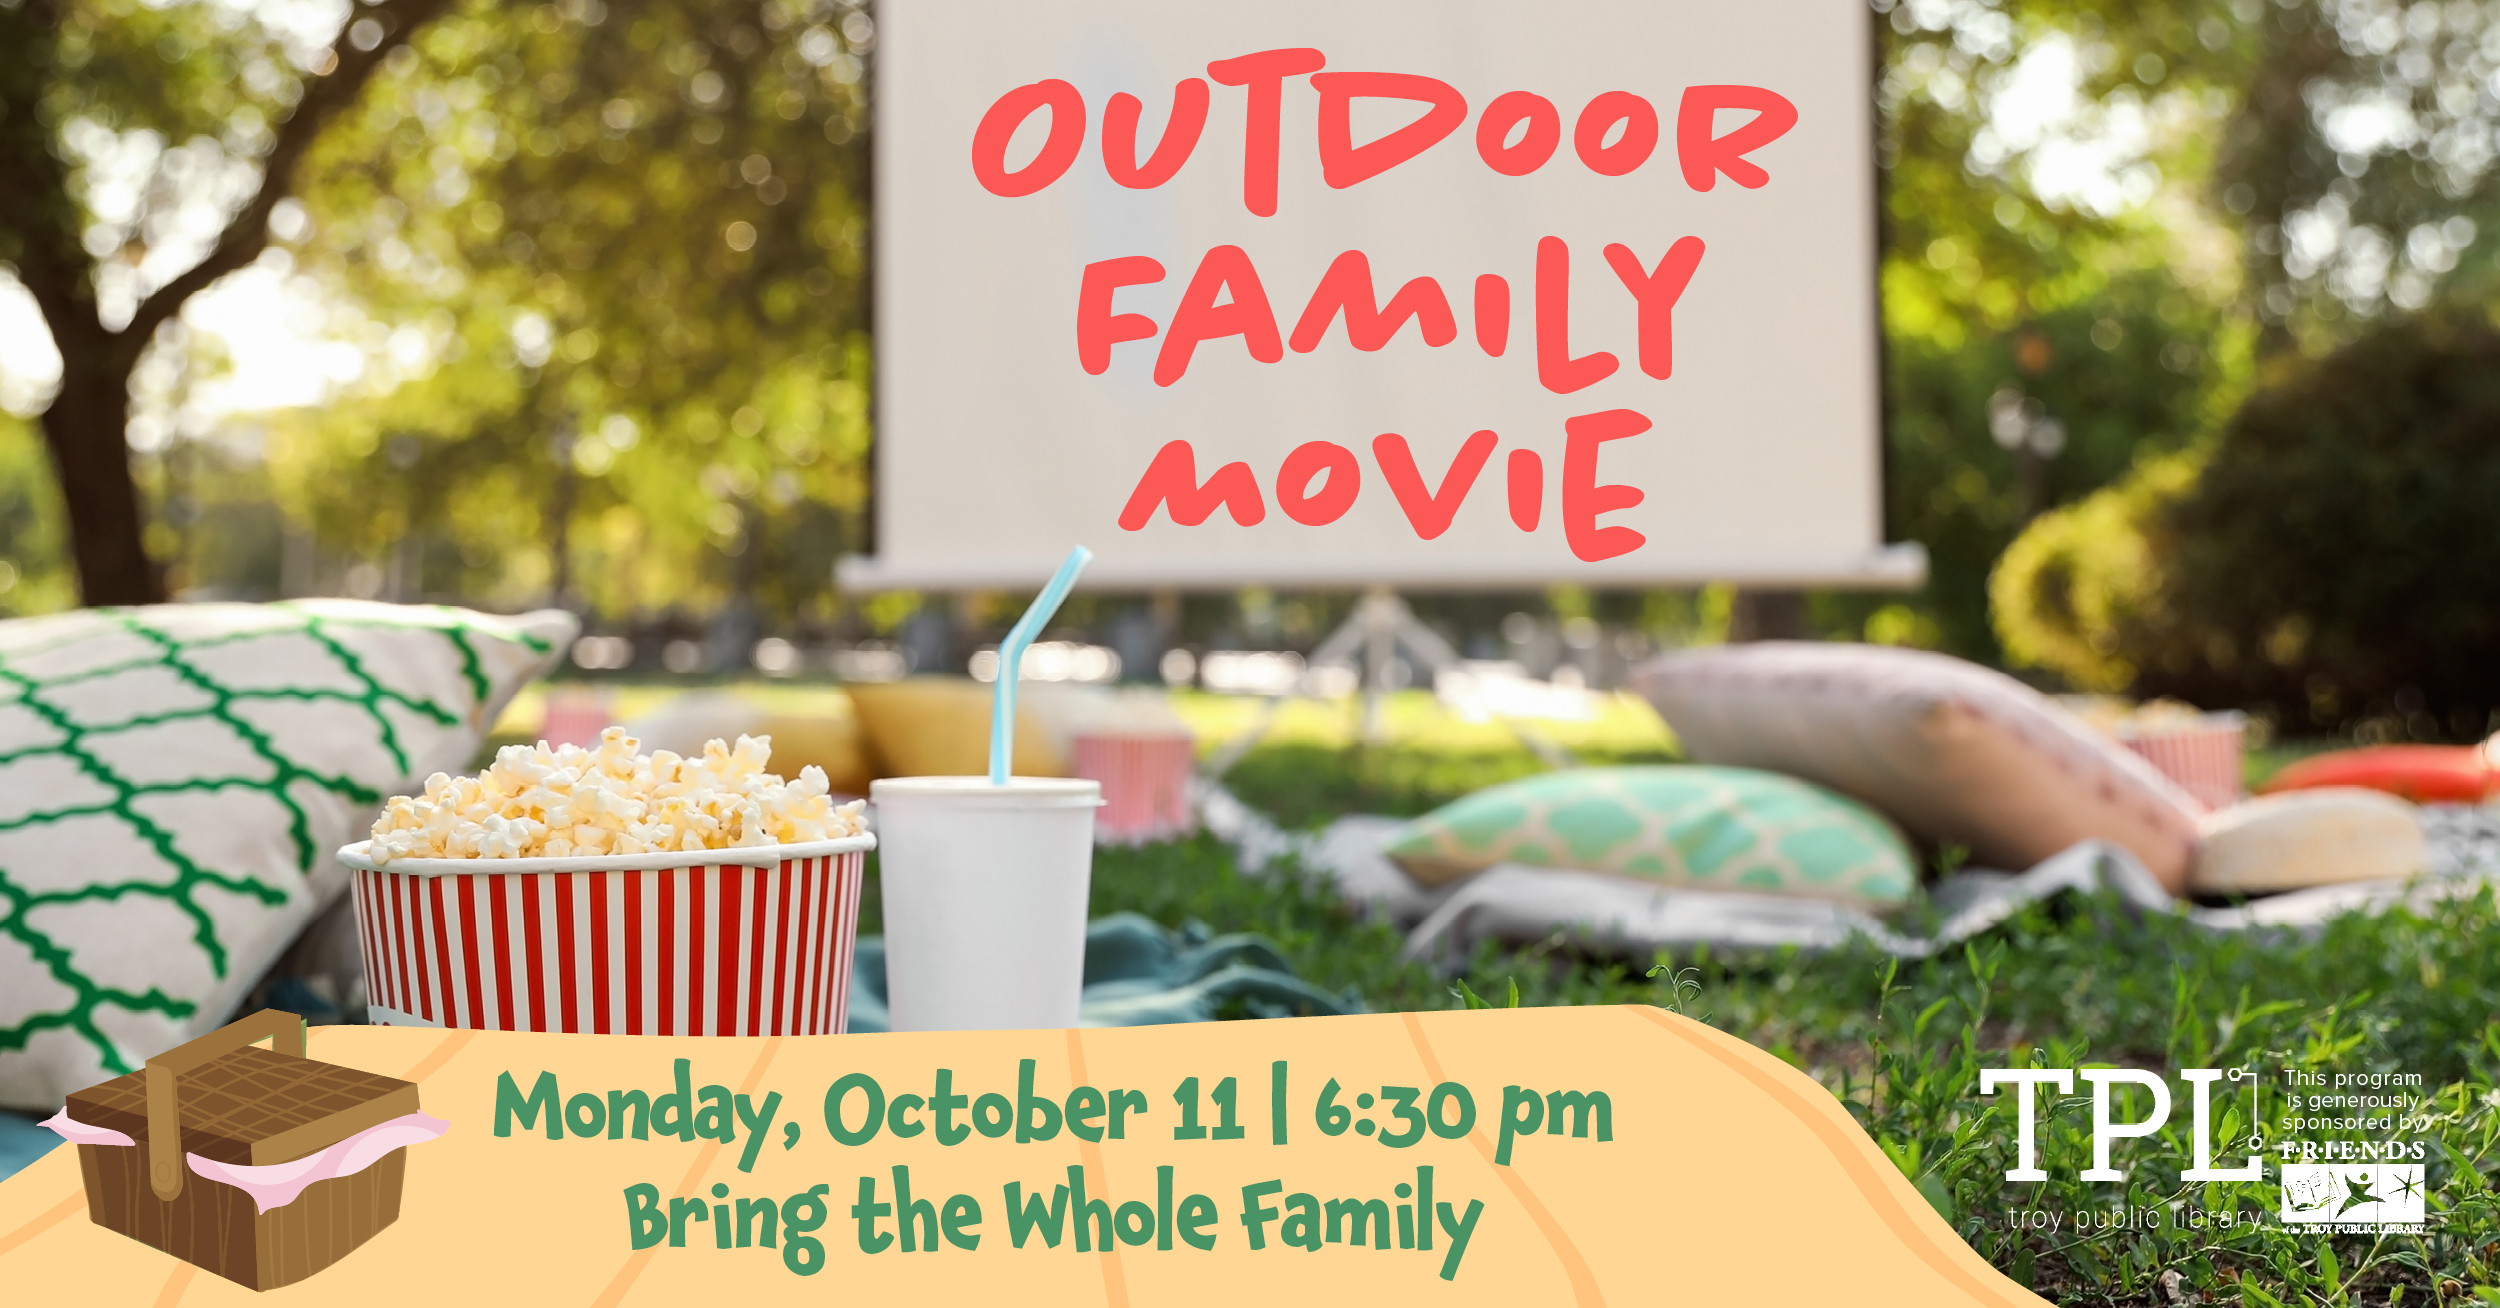 Outdoor Family Movie. Monday, October 11 6:30pm. Sponsored by the Friends of the Troy Public Library.